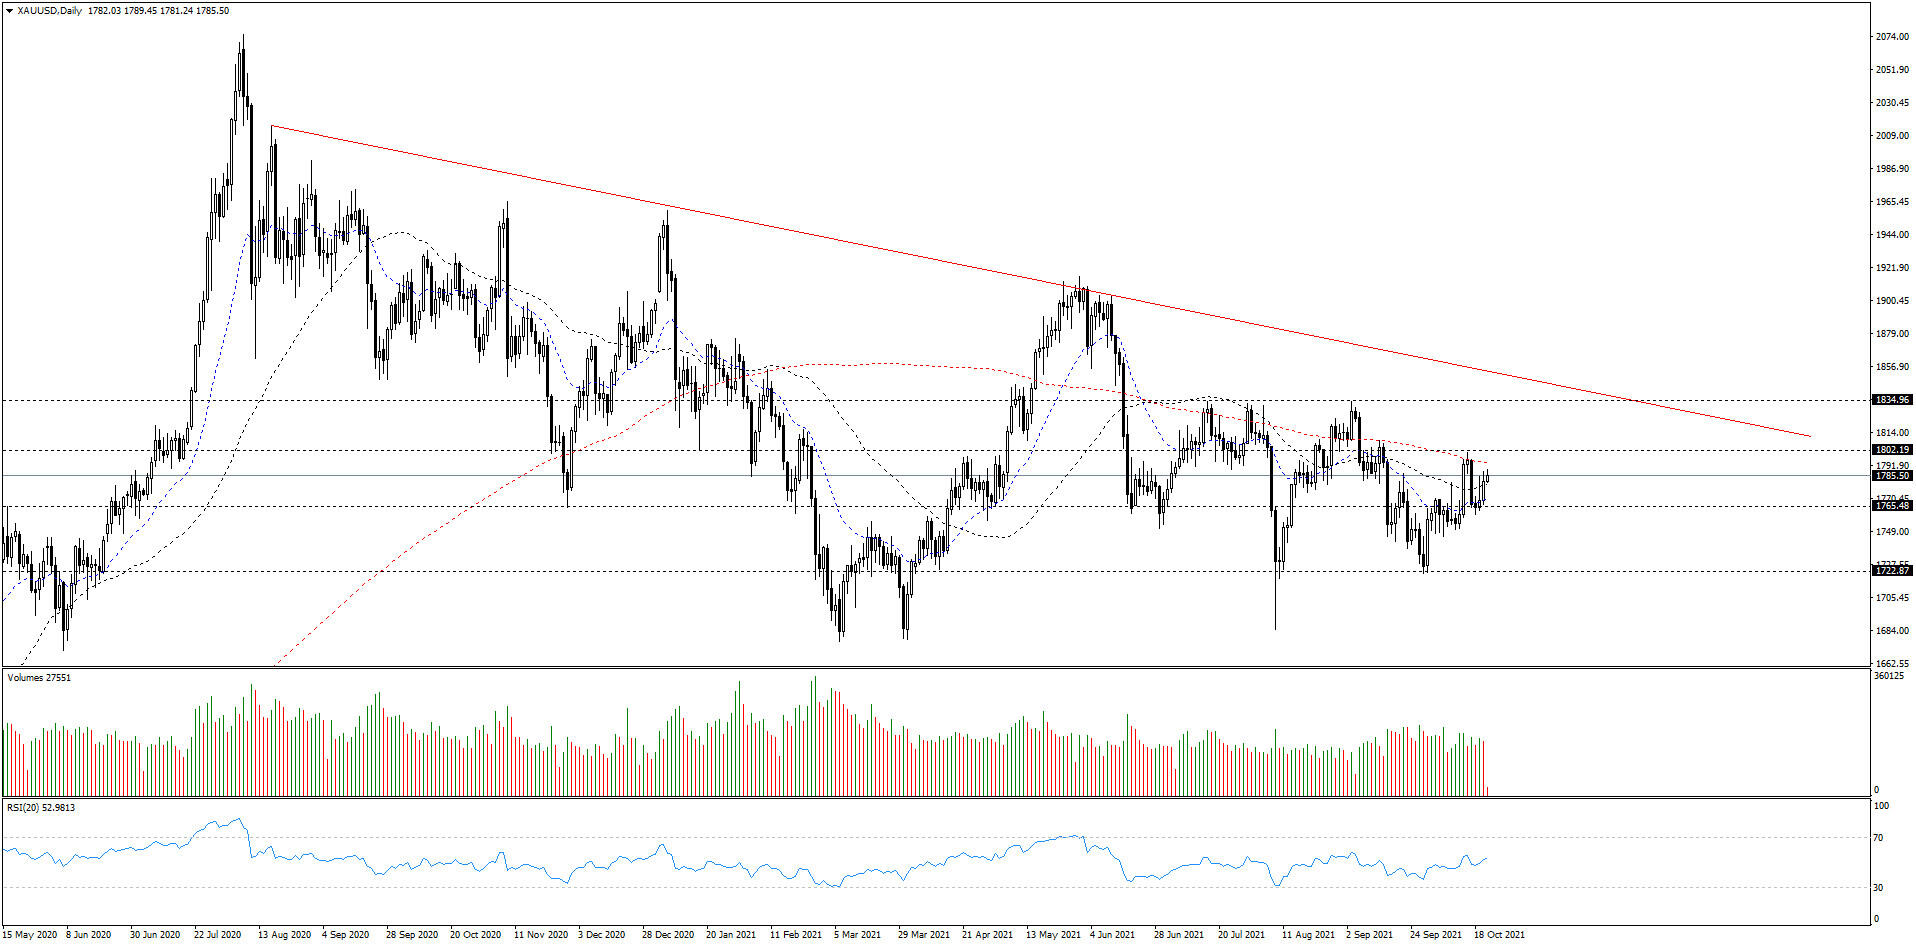 XAU/USD: The daily chart